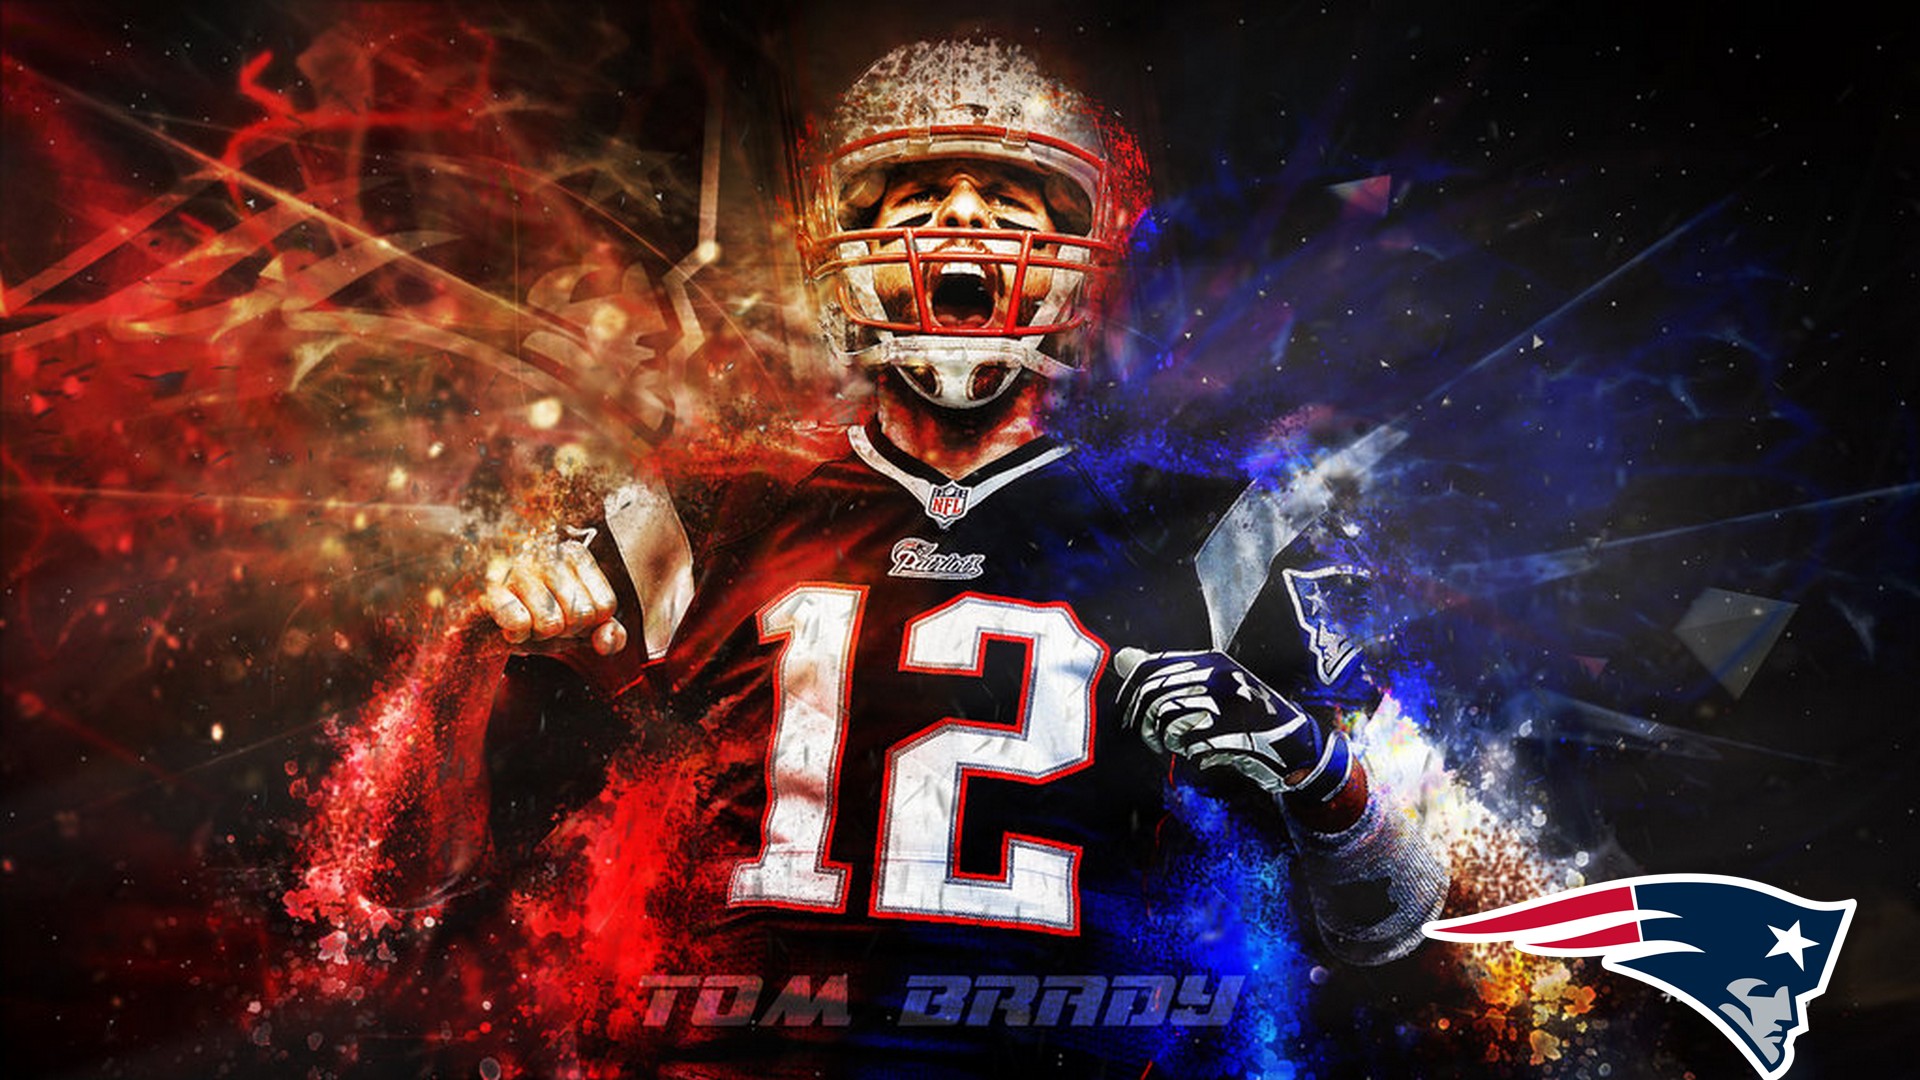 HD Tom Brady Backgrounds With Resolution 1920X1080 pixel. You can make this wallpaper for your Mac or Windows Desktop Background, iPhone, Android or Tablet and another Smartphone device for free